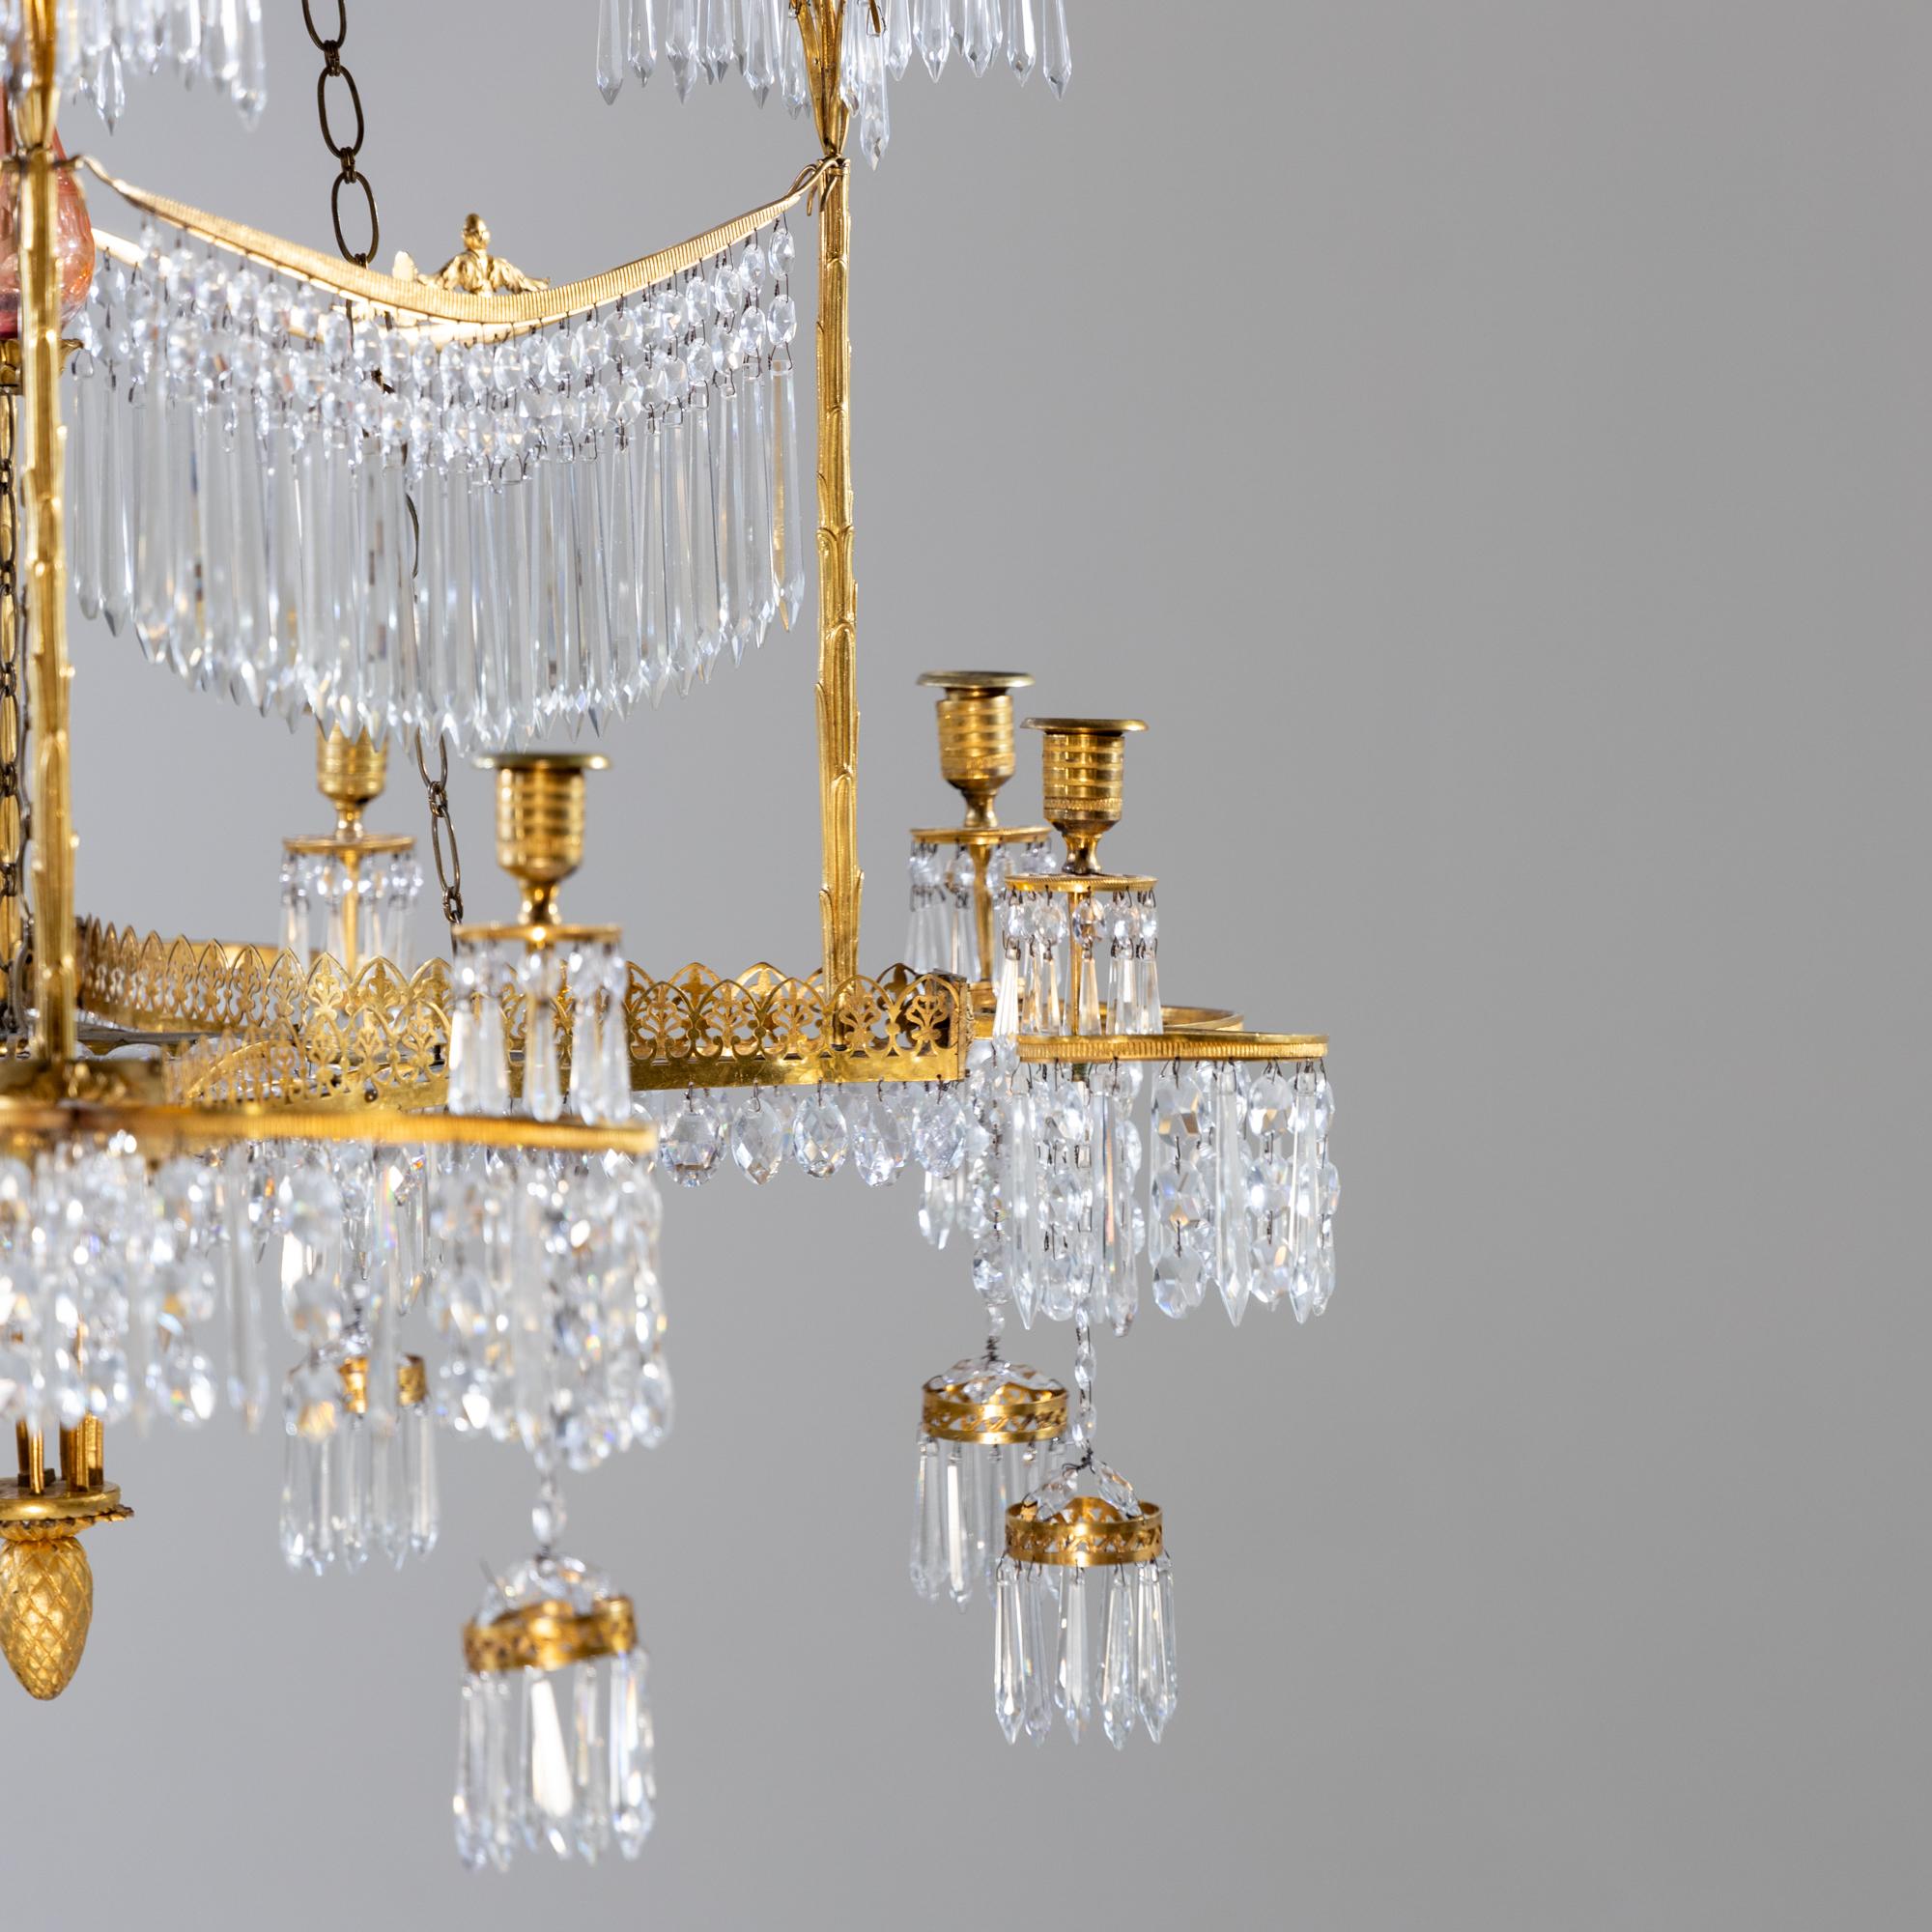 Chandelier with Palm Trees, Werner & Mieth, Berlin c. 1800-1810 For Sale 9